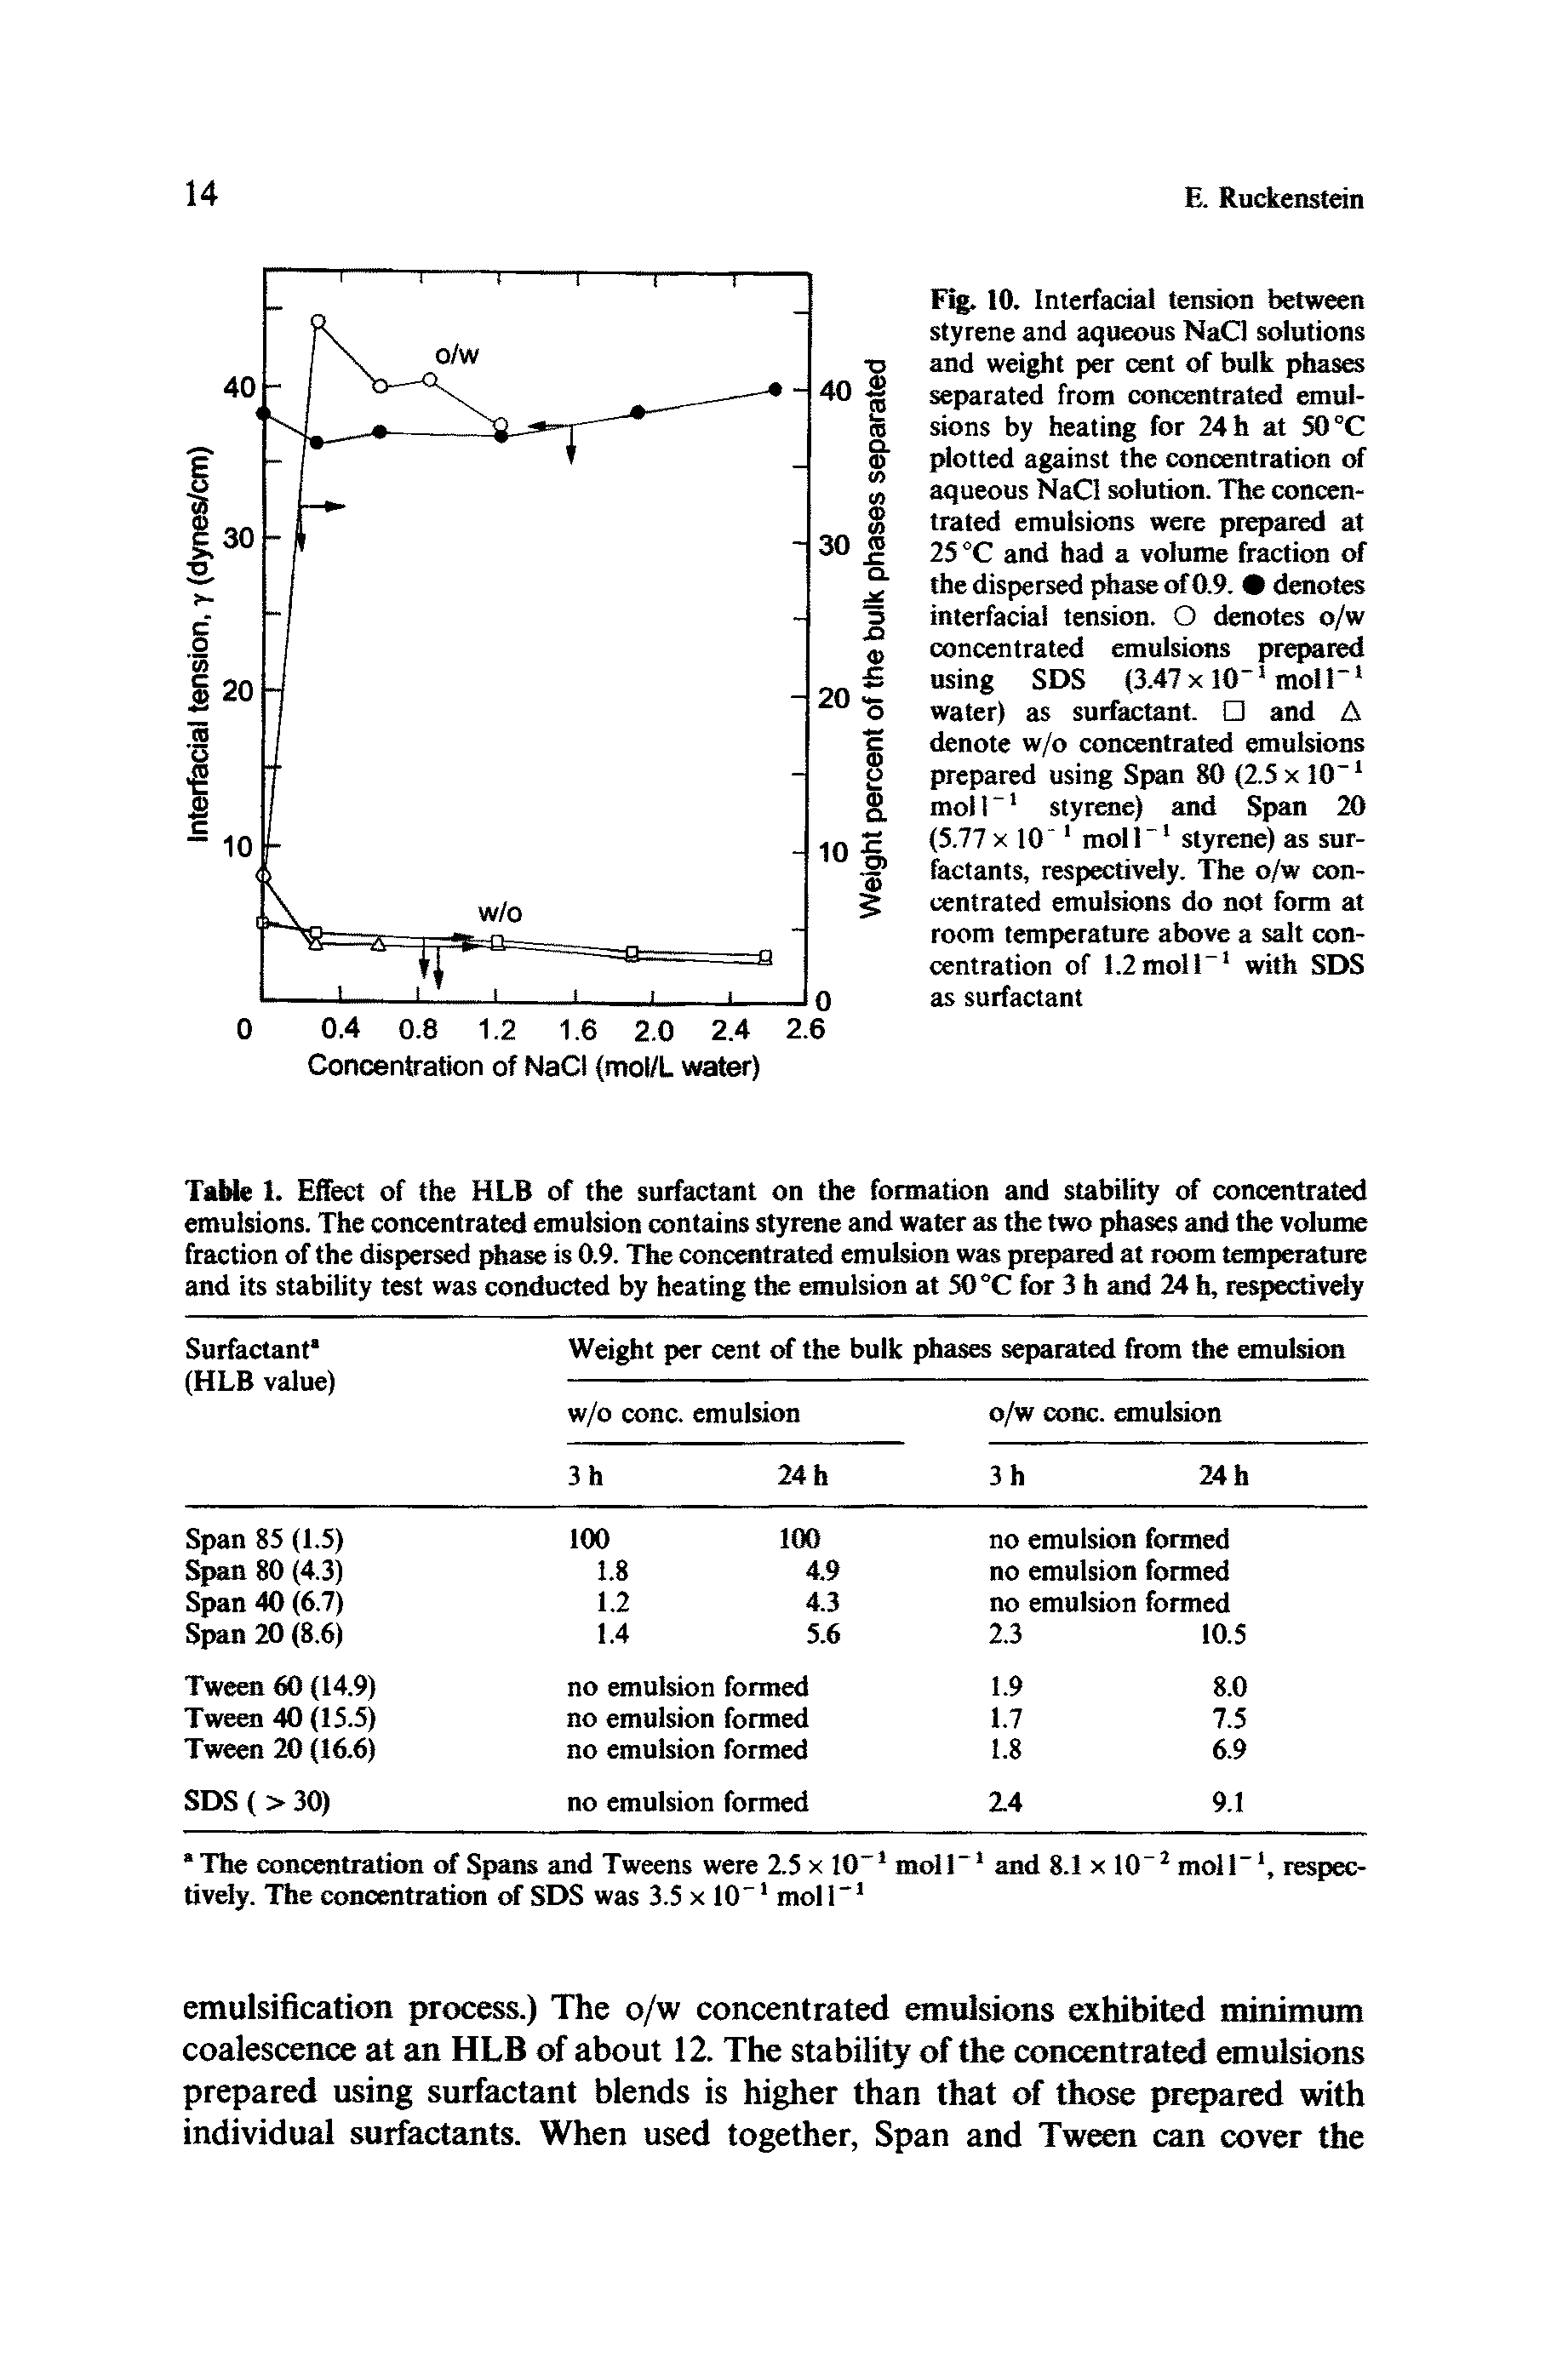 Table 1. Effect of the HLB of the surfactant on the formation and stability of concentrated emulsions. The concentrated emulsion contains styrene and water as the two phases and the volume fraction of the dispersed phase is 0.9. The concentrated emulsion was prepared at room temperature and its stability test was conducted by heating the emulsion at 50 °C for 3 h and 24 h, respectively...